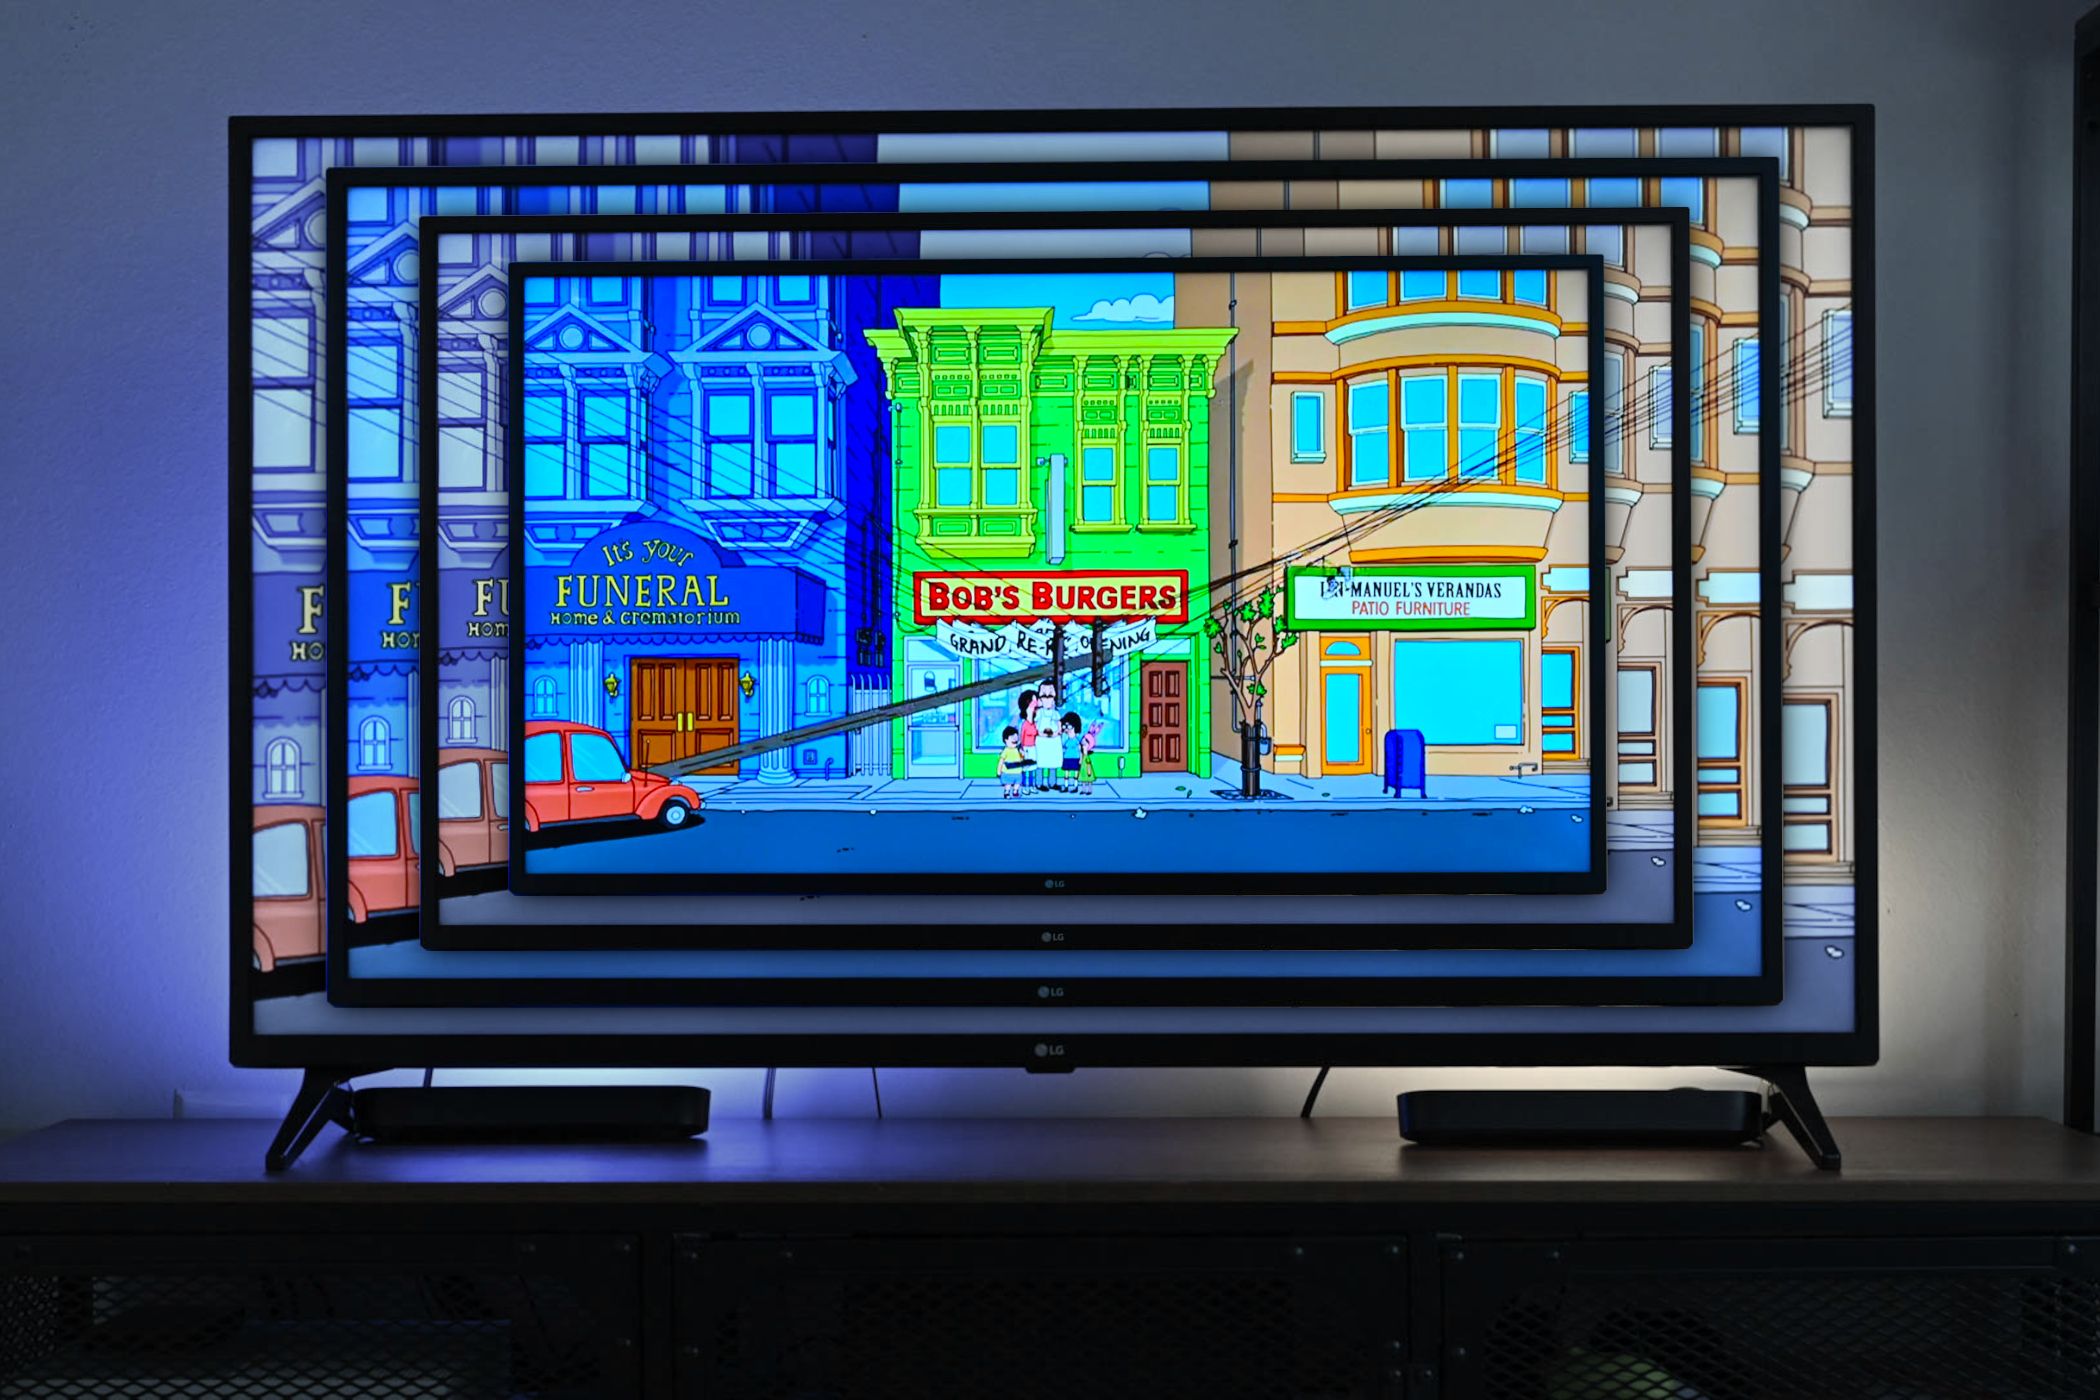 A widescreen TV shrinking to different sizes.